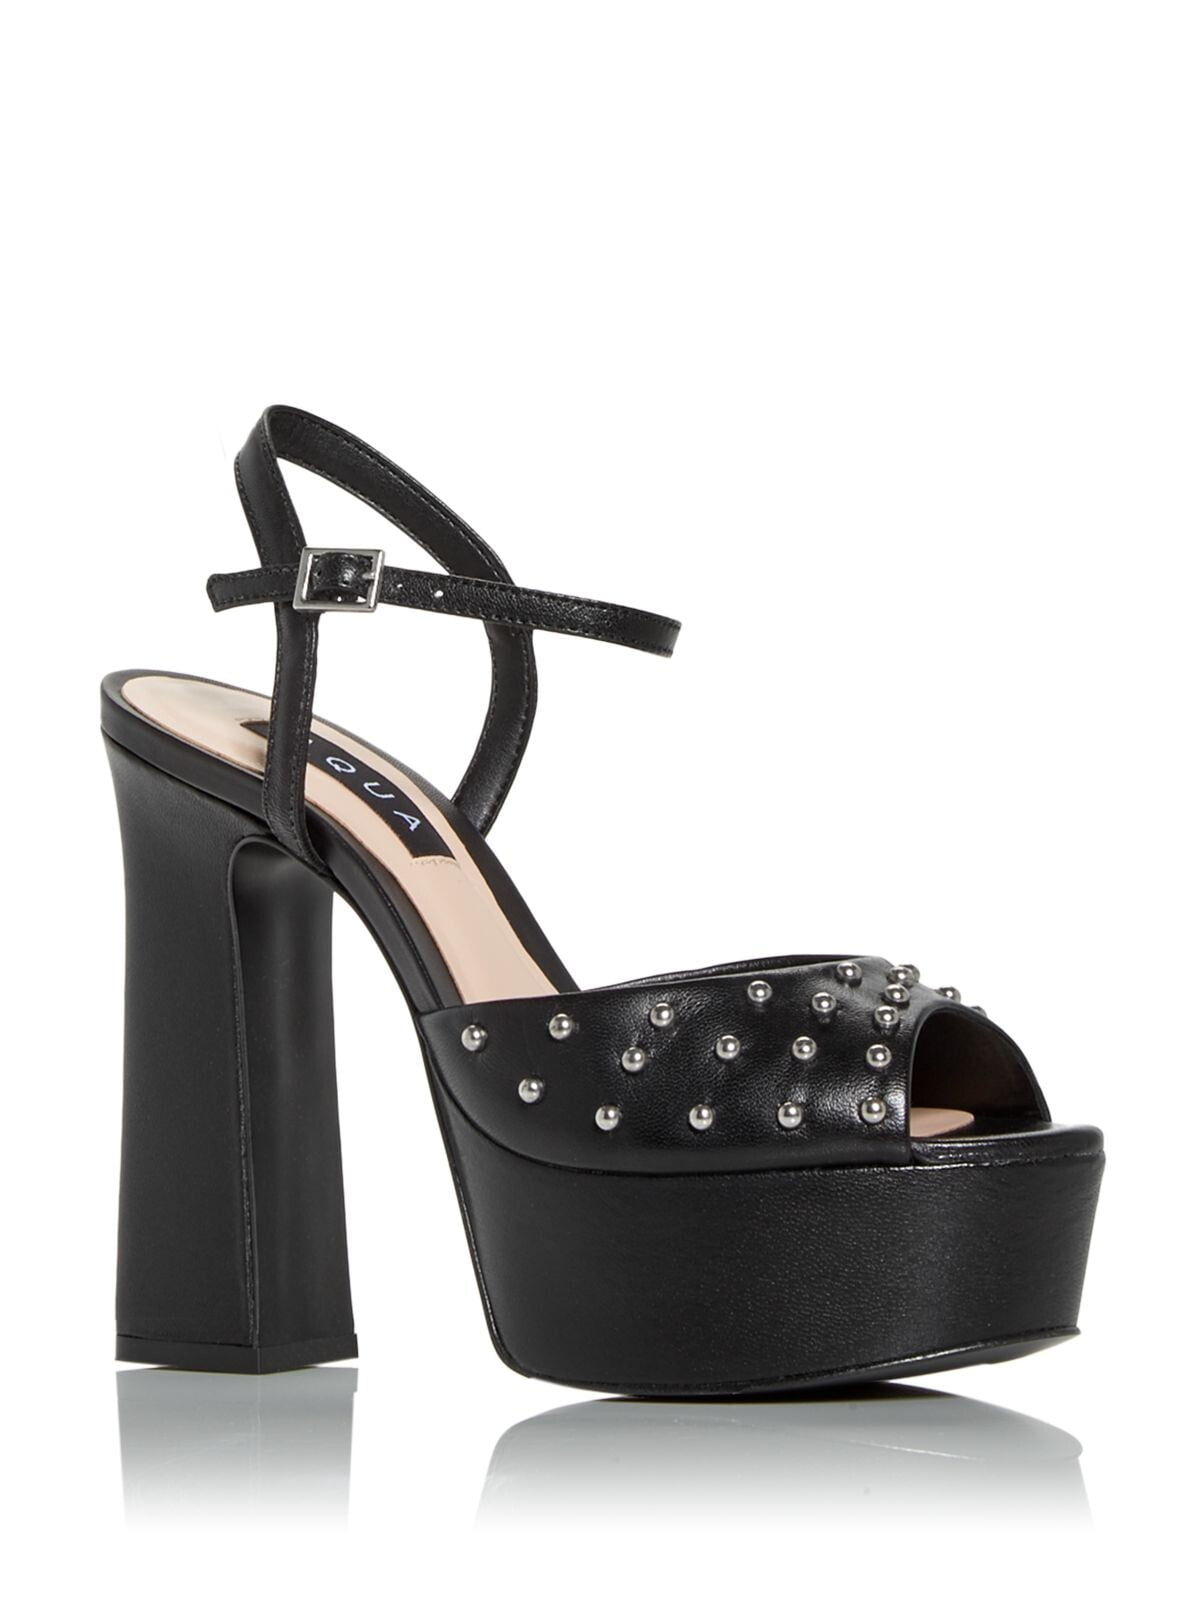 Shop Studded Block Heel Sandals with Ankle Strap and Buckle Closure Online  | Max UAE